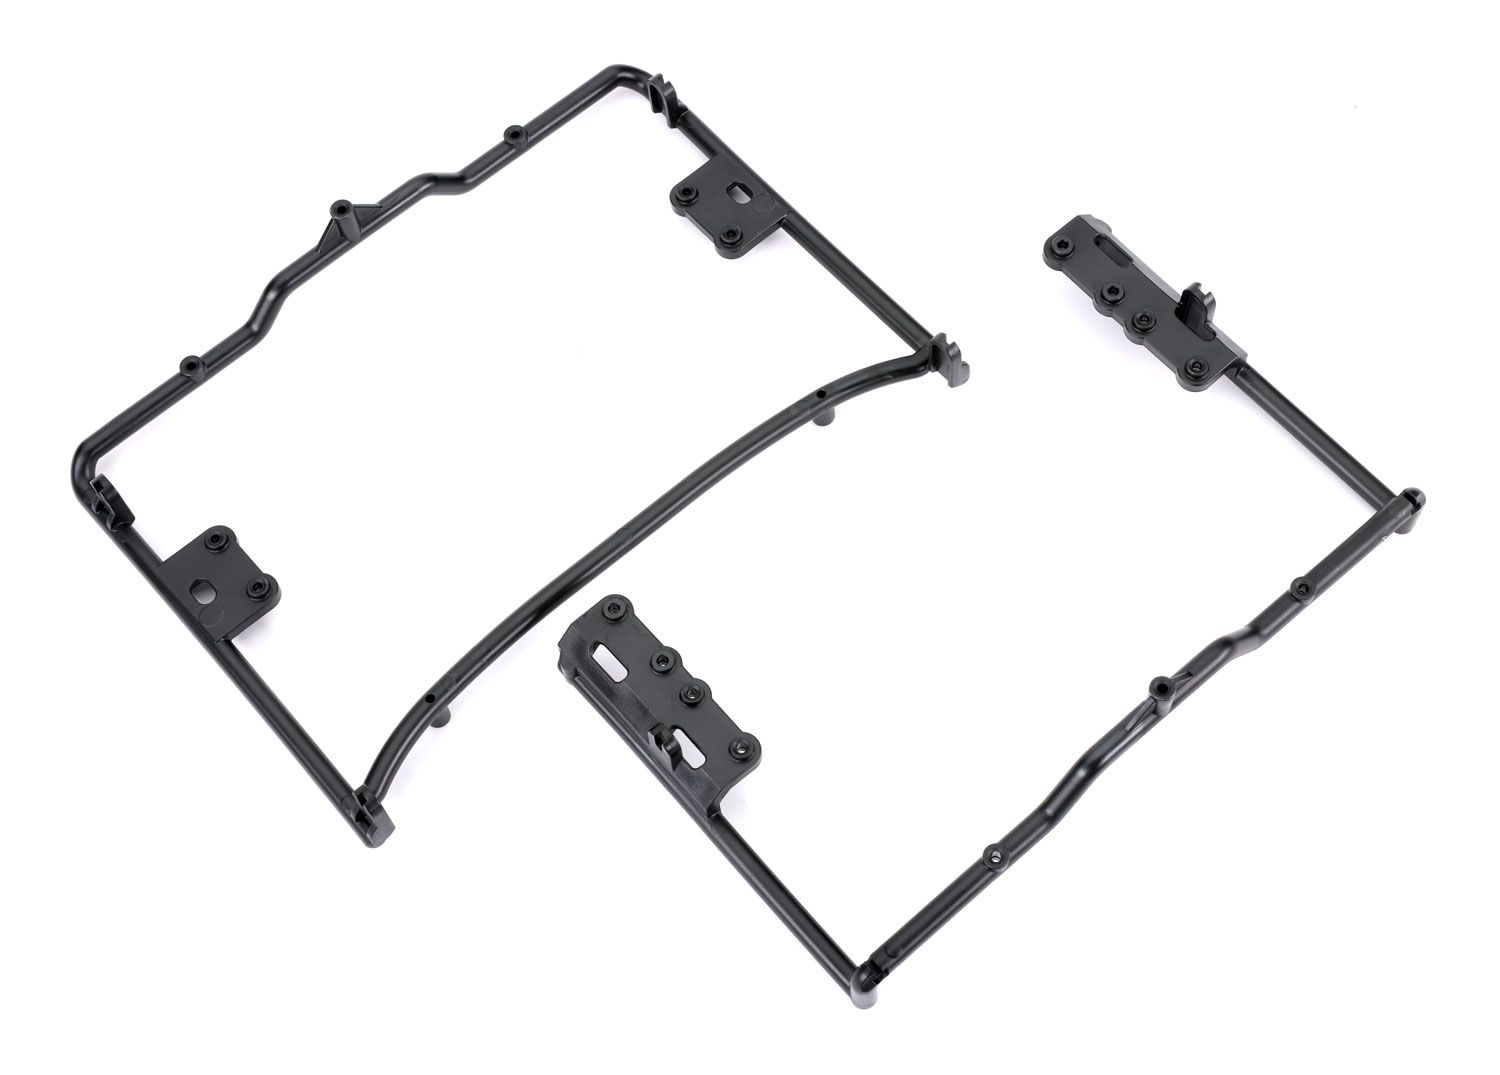 TRAXXAS 9233 Body cage, front & rear (fits #9230 body)